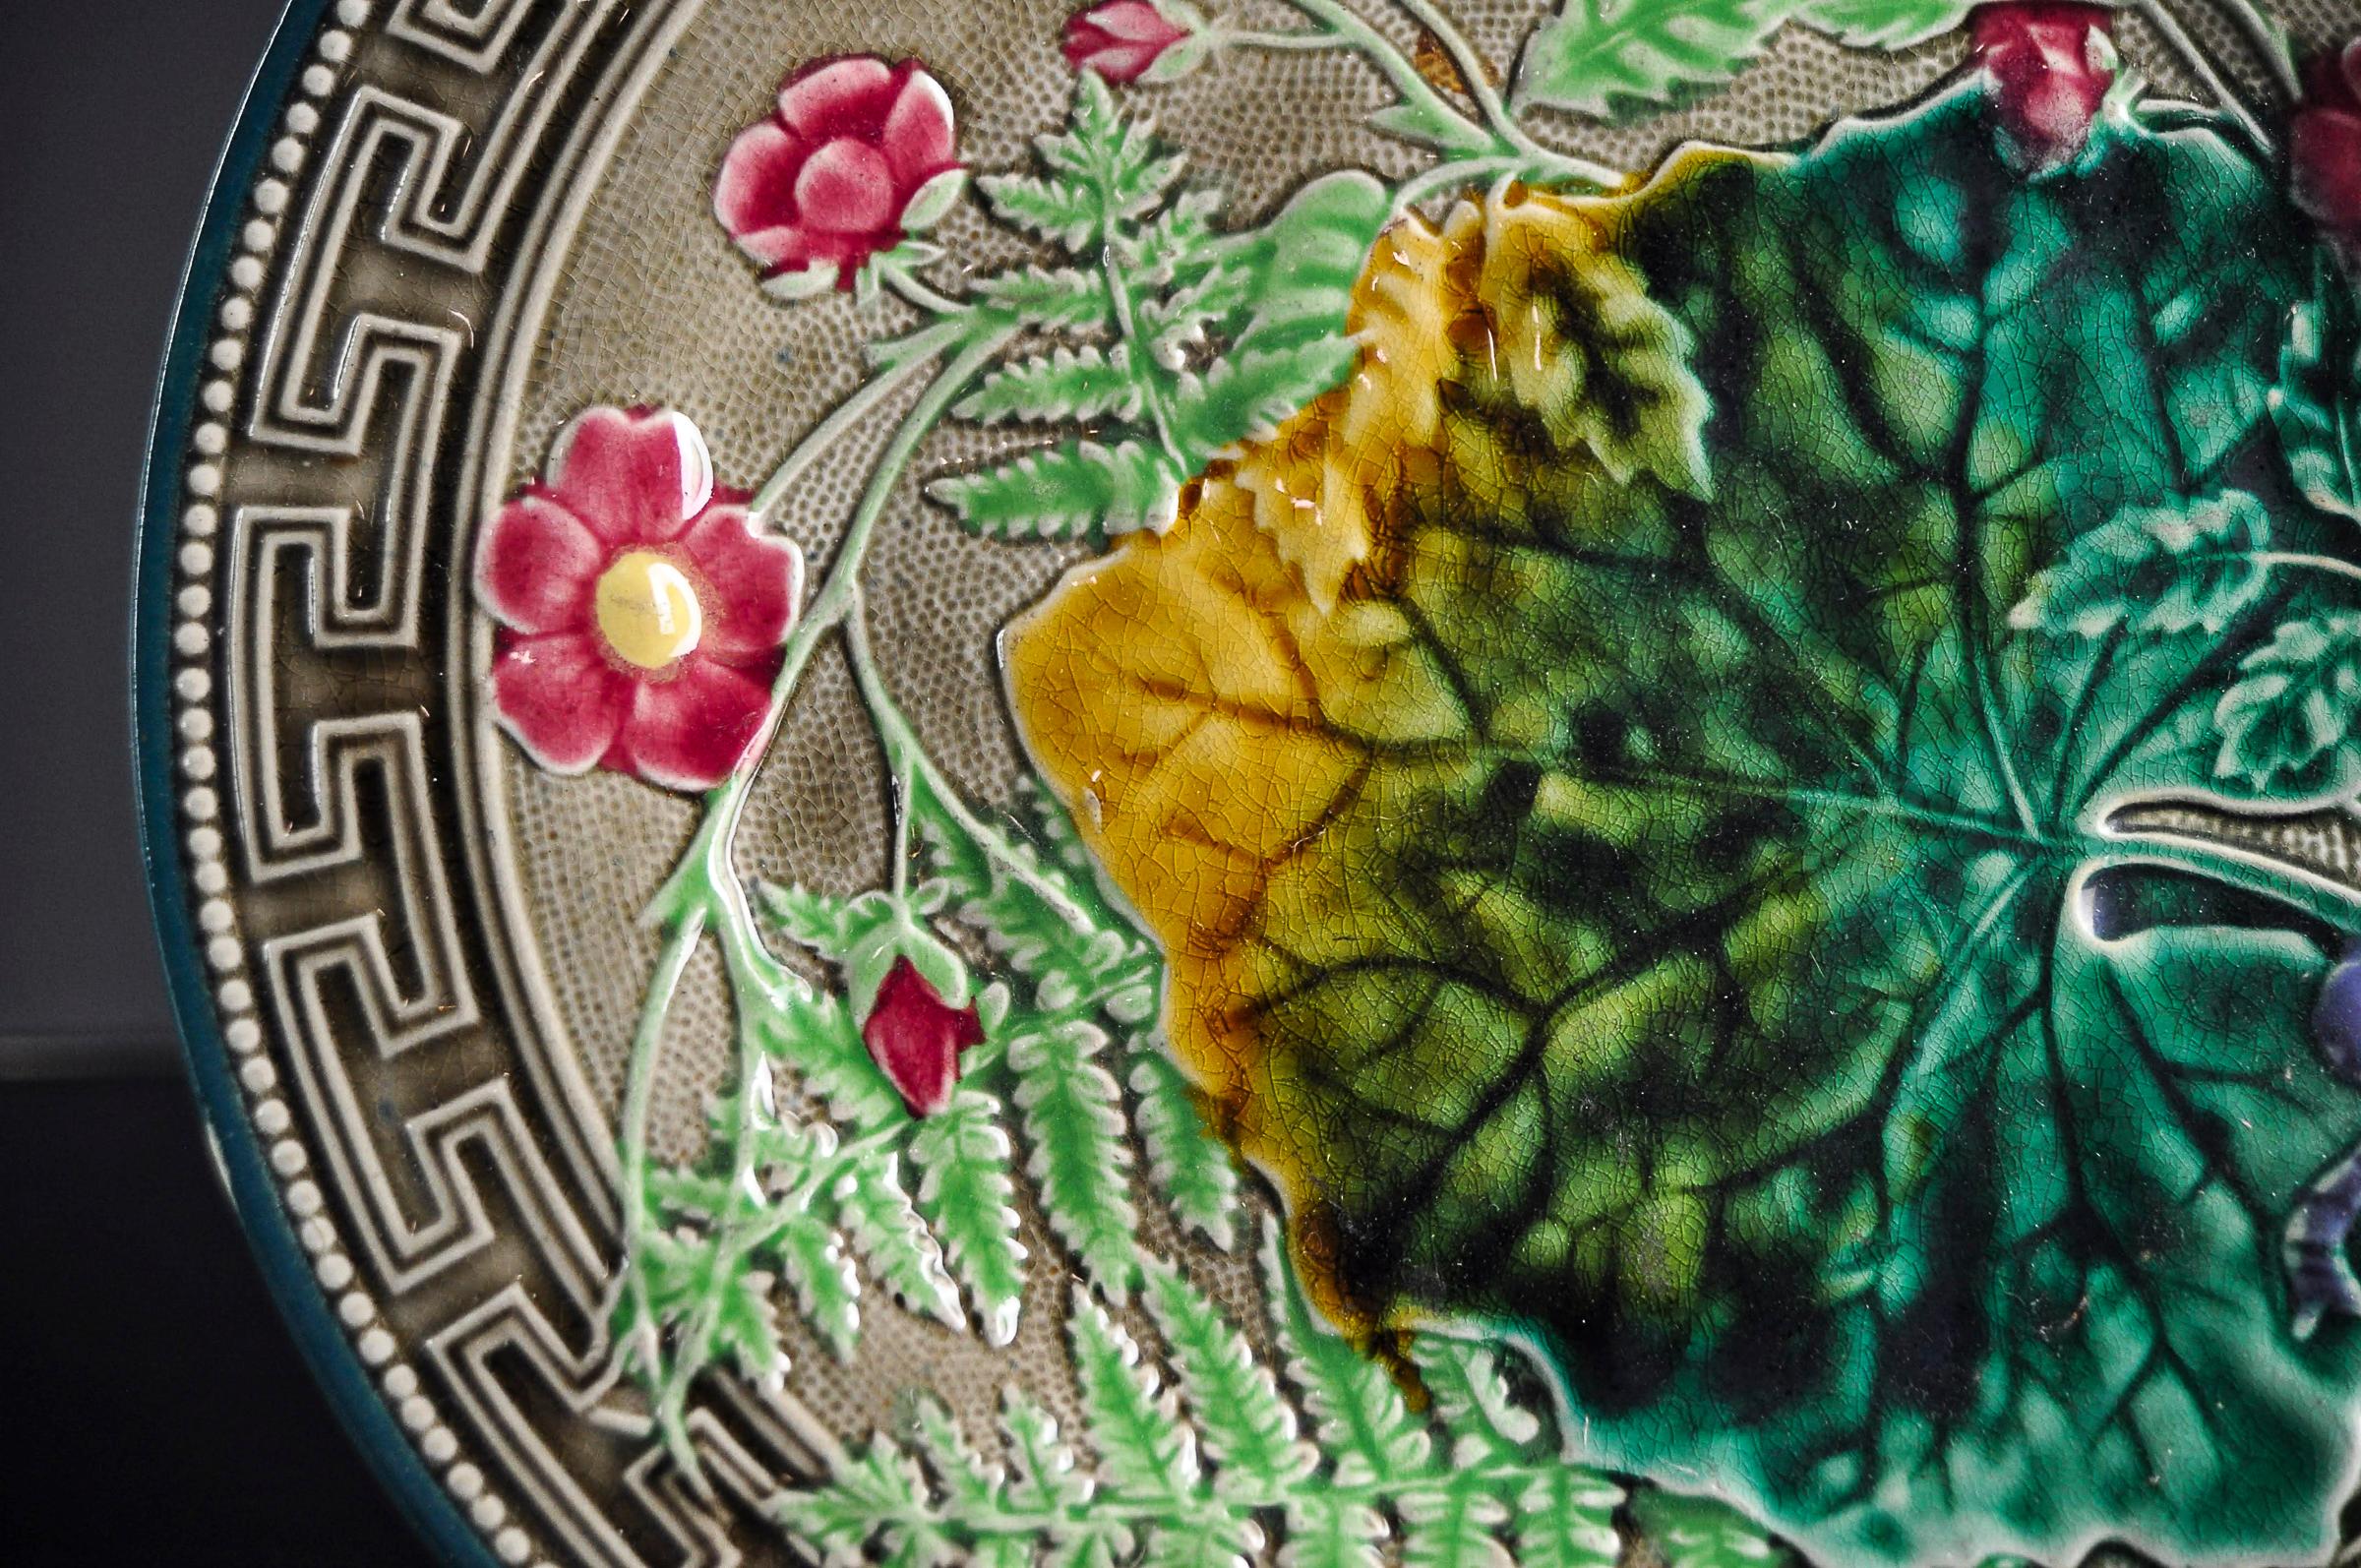 Molded Majolica Leaf, Fern and Flowers Plate with Greek Key Boarder, Signed Choisy-le-R